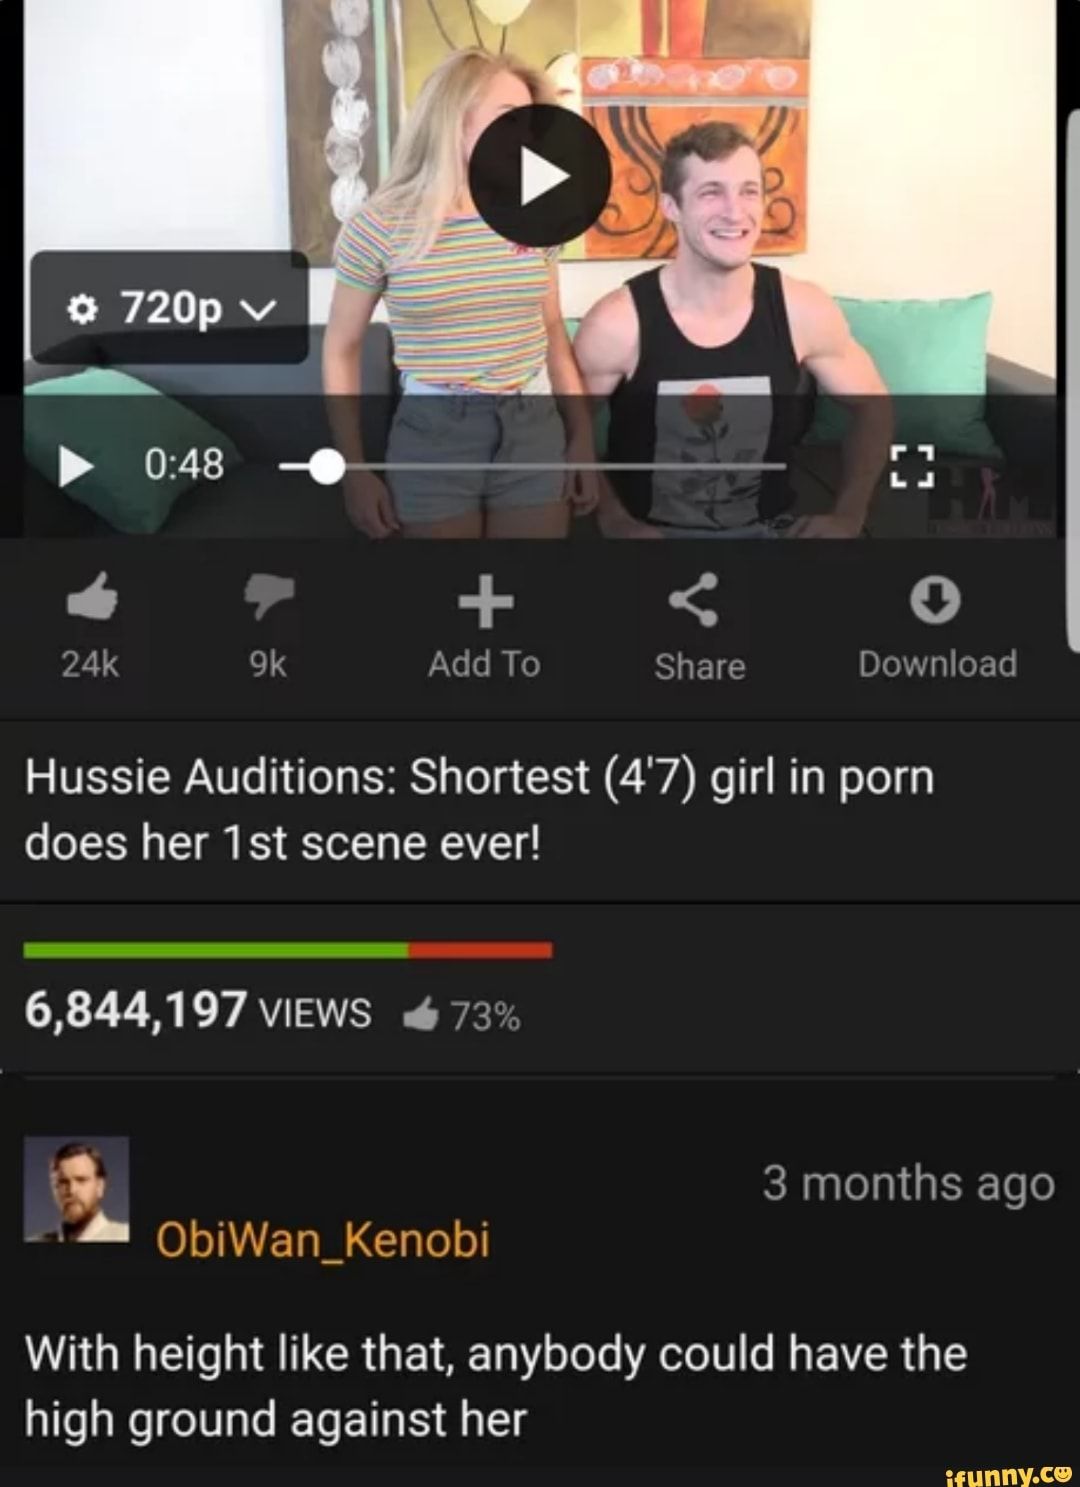 Hussie auditions scene ever